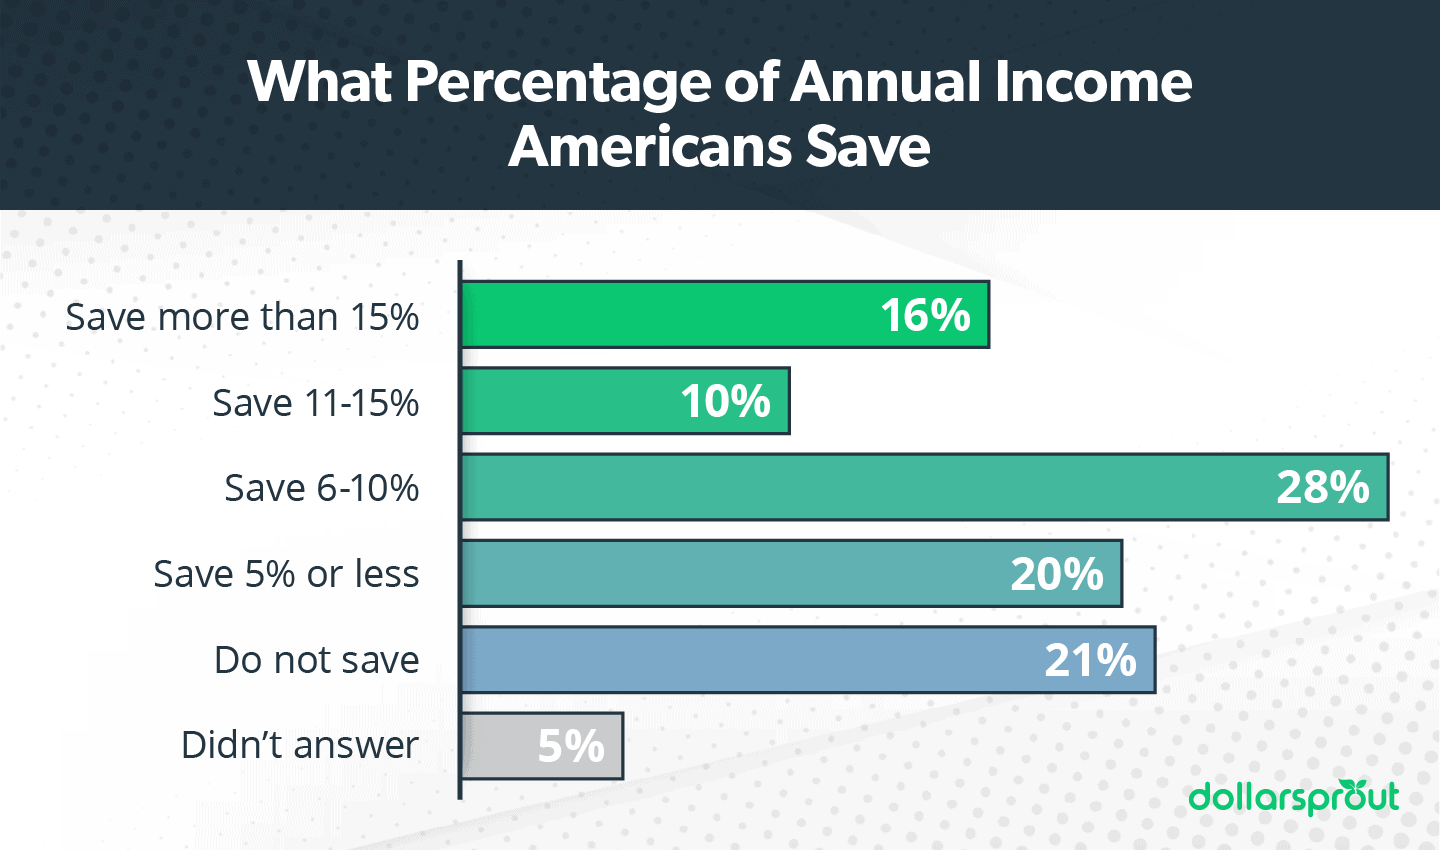 How much do Americans save